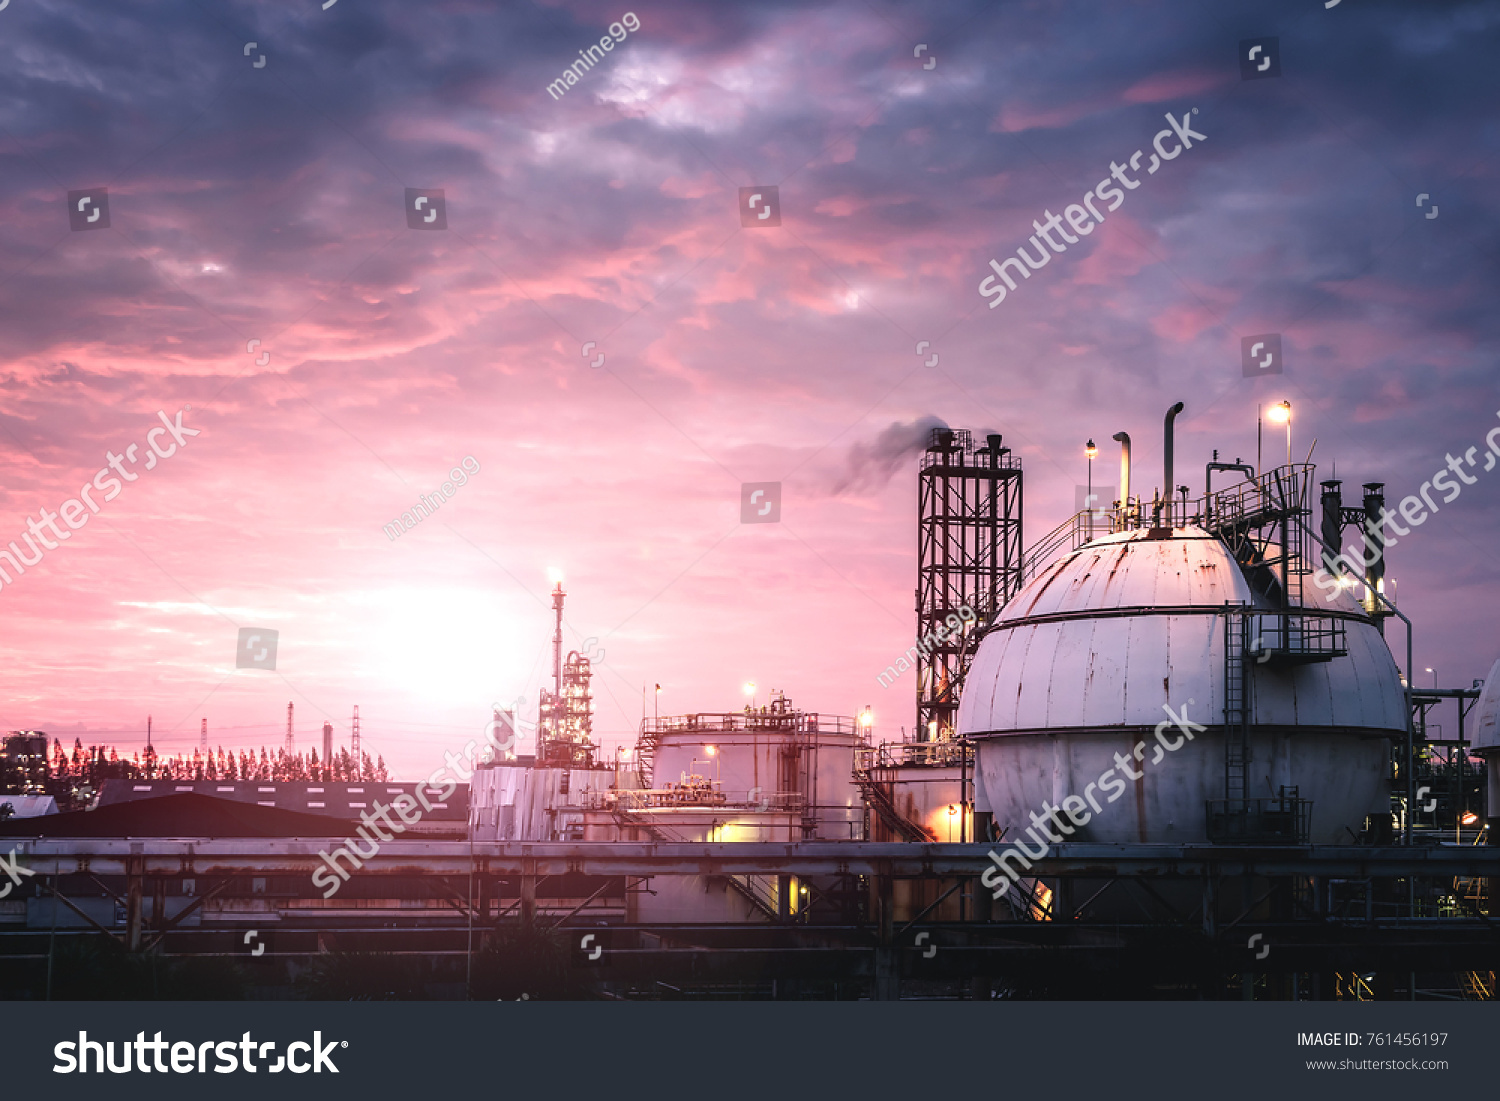 Gas storage sphere tank in Oil and gas refinery plant with sunset sky background #761456197